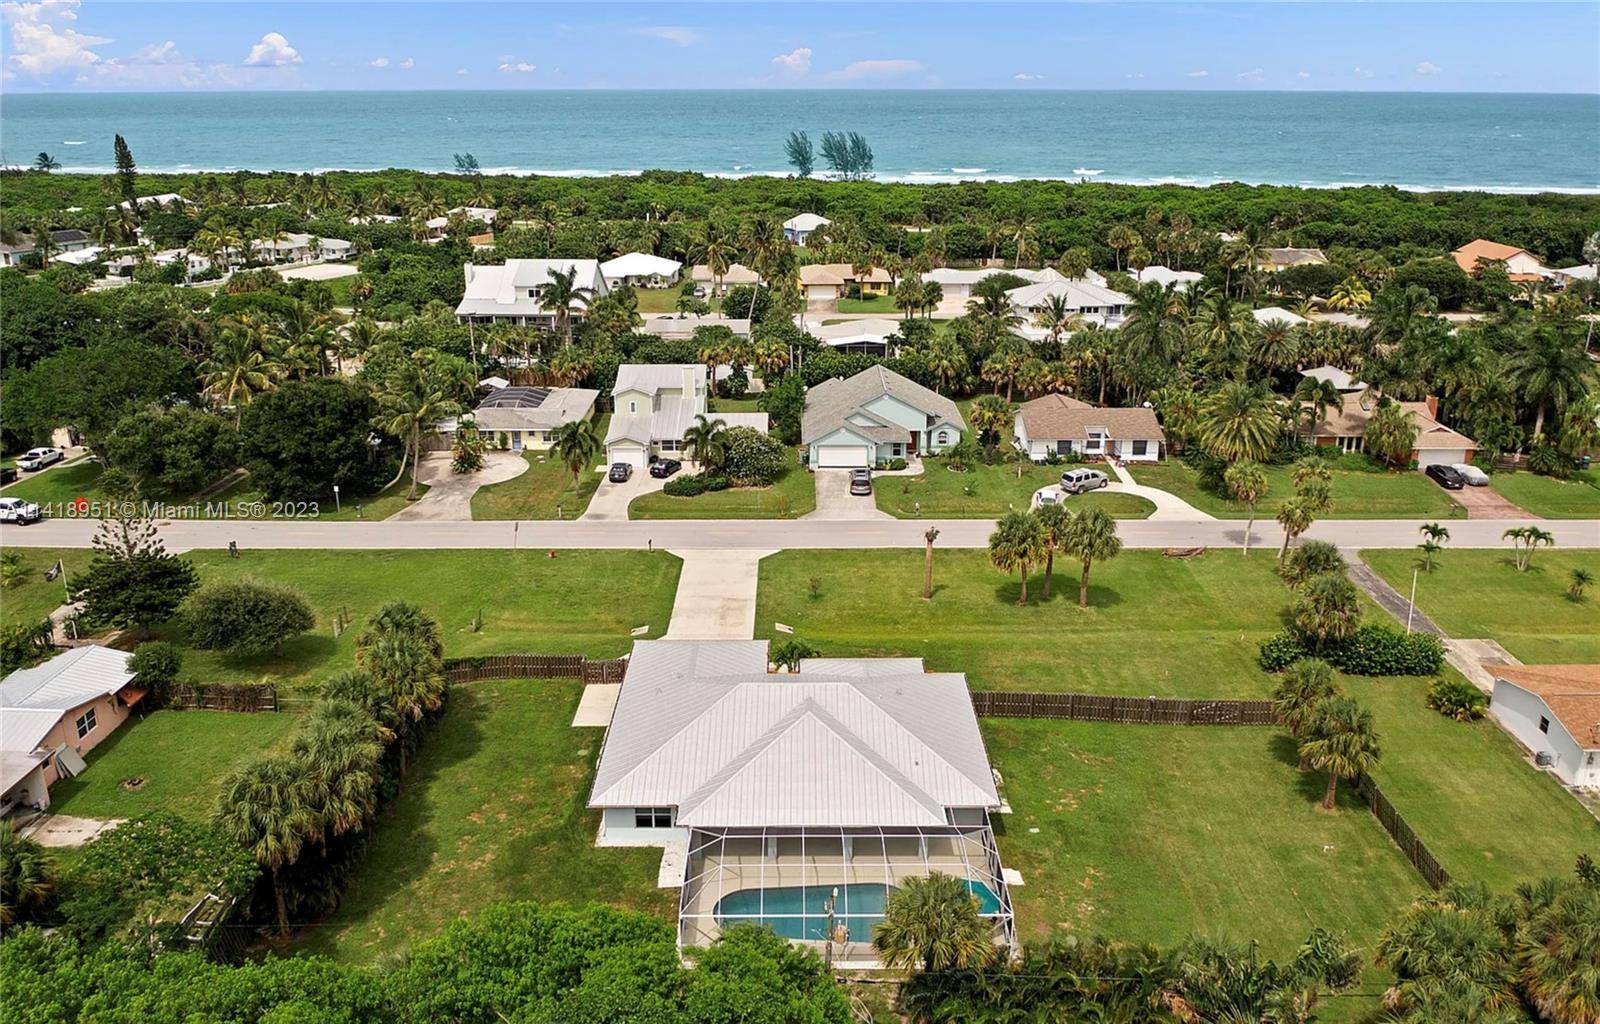 Stunning beach house for seasonal rental just steps from the Atlantic Ocean on beautiful North Hutchinson Island.